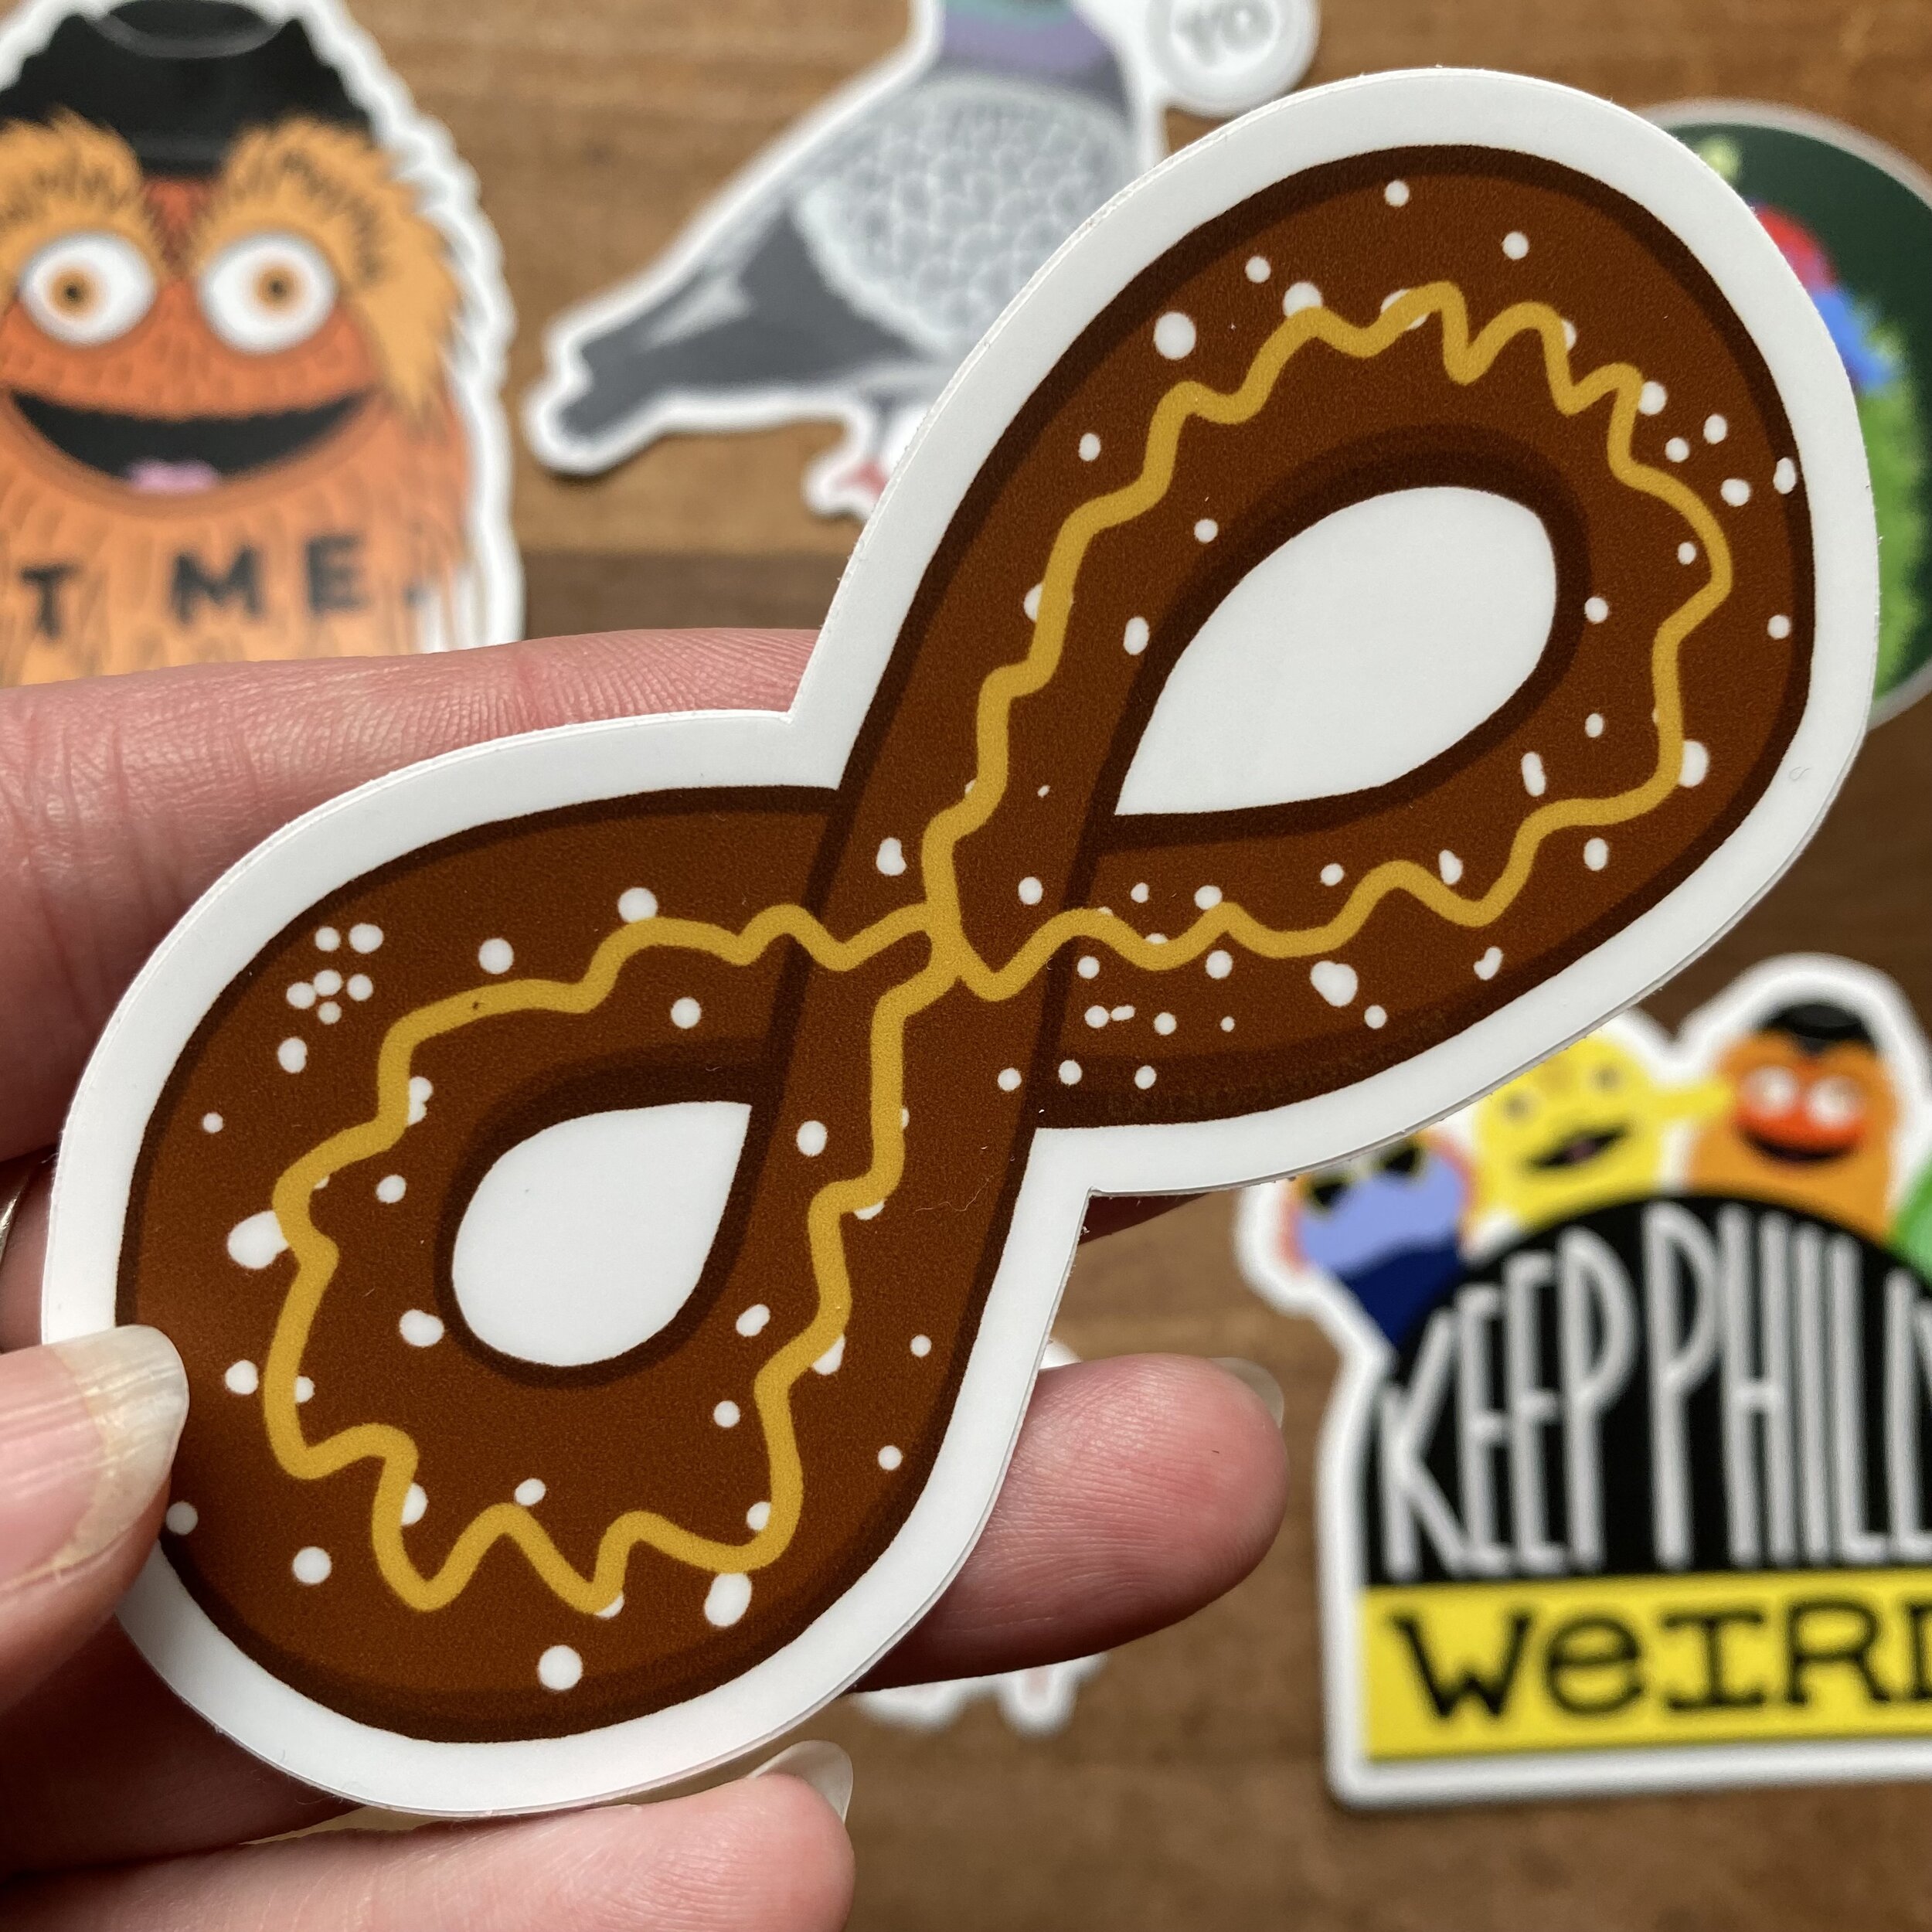 Philly Sticker Packs — Philadelphia Independents